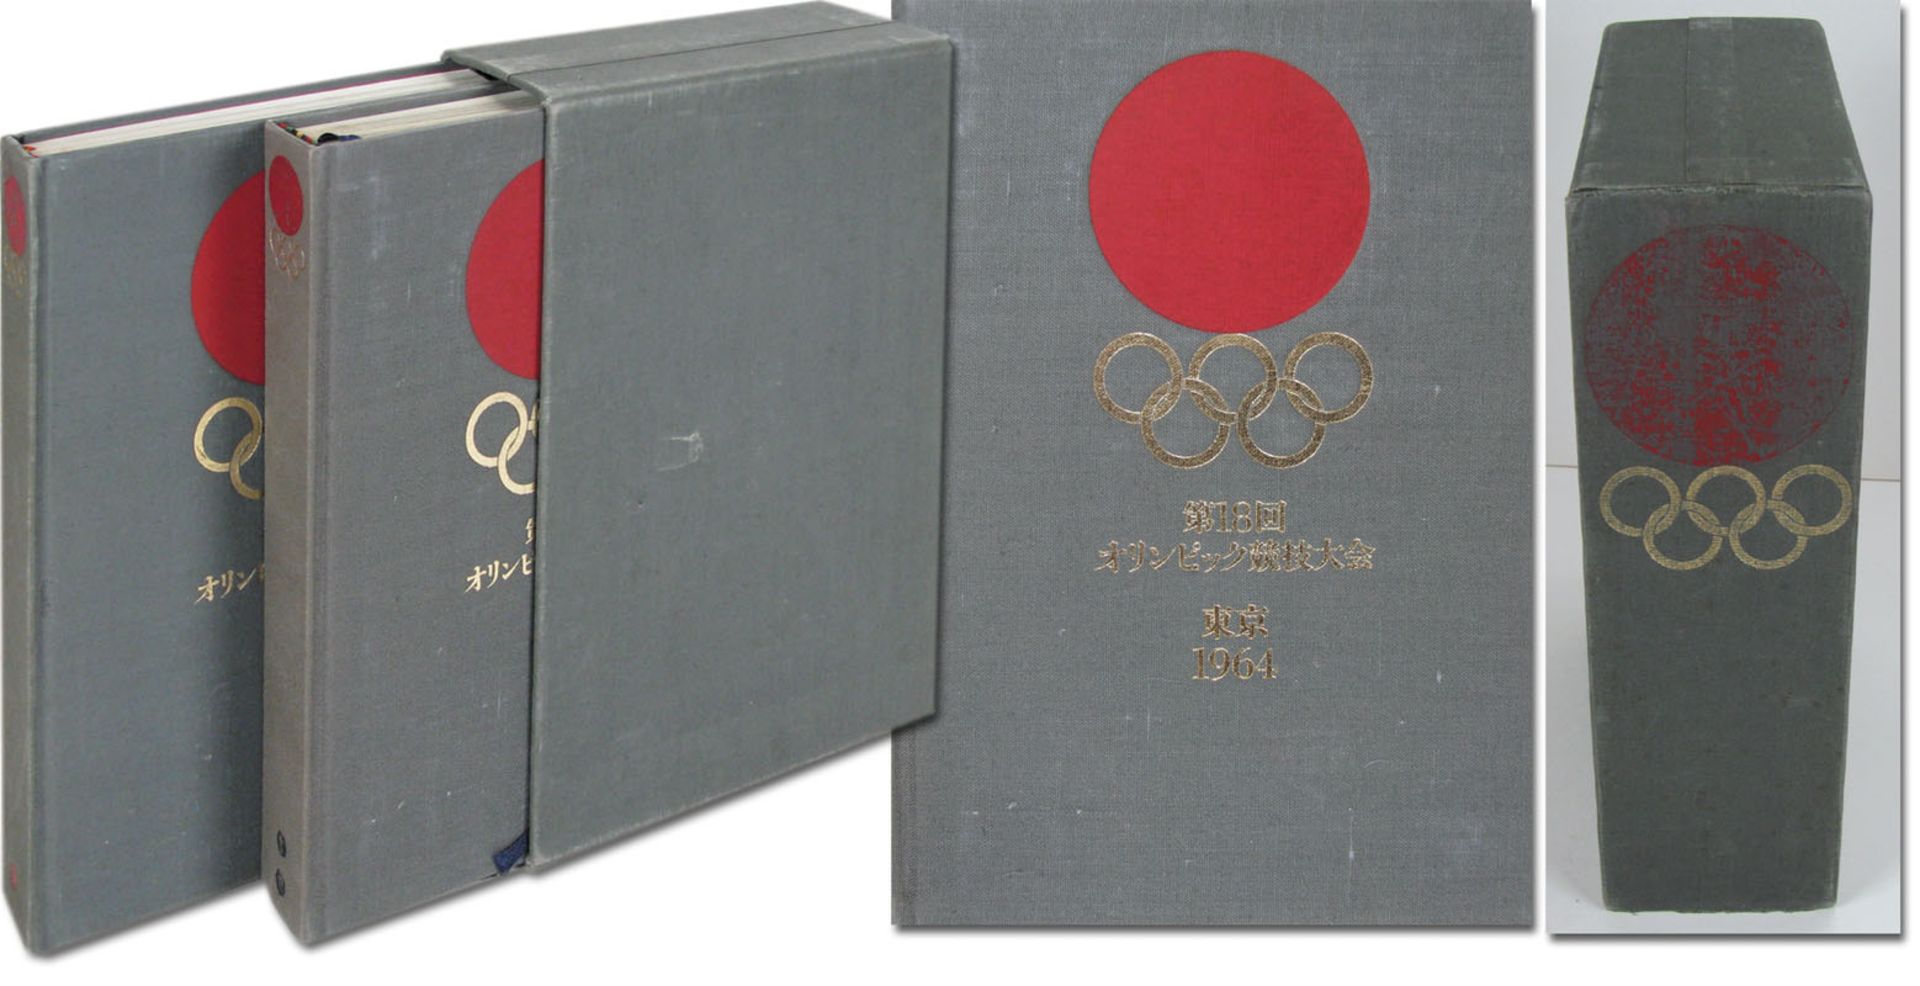 Olympic Games 1964 Tokio. Official Report Japan V - The Games of the XVIII Olympiad Tokyo 1964. The 